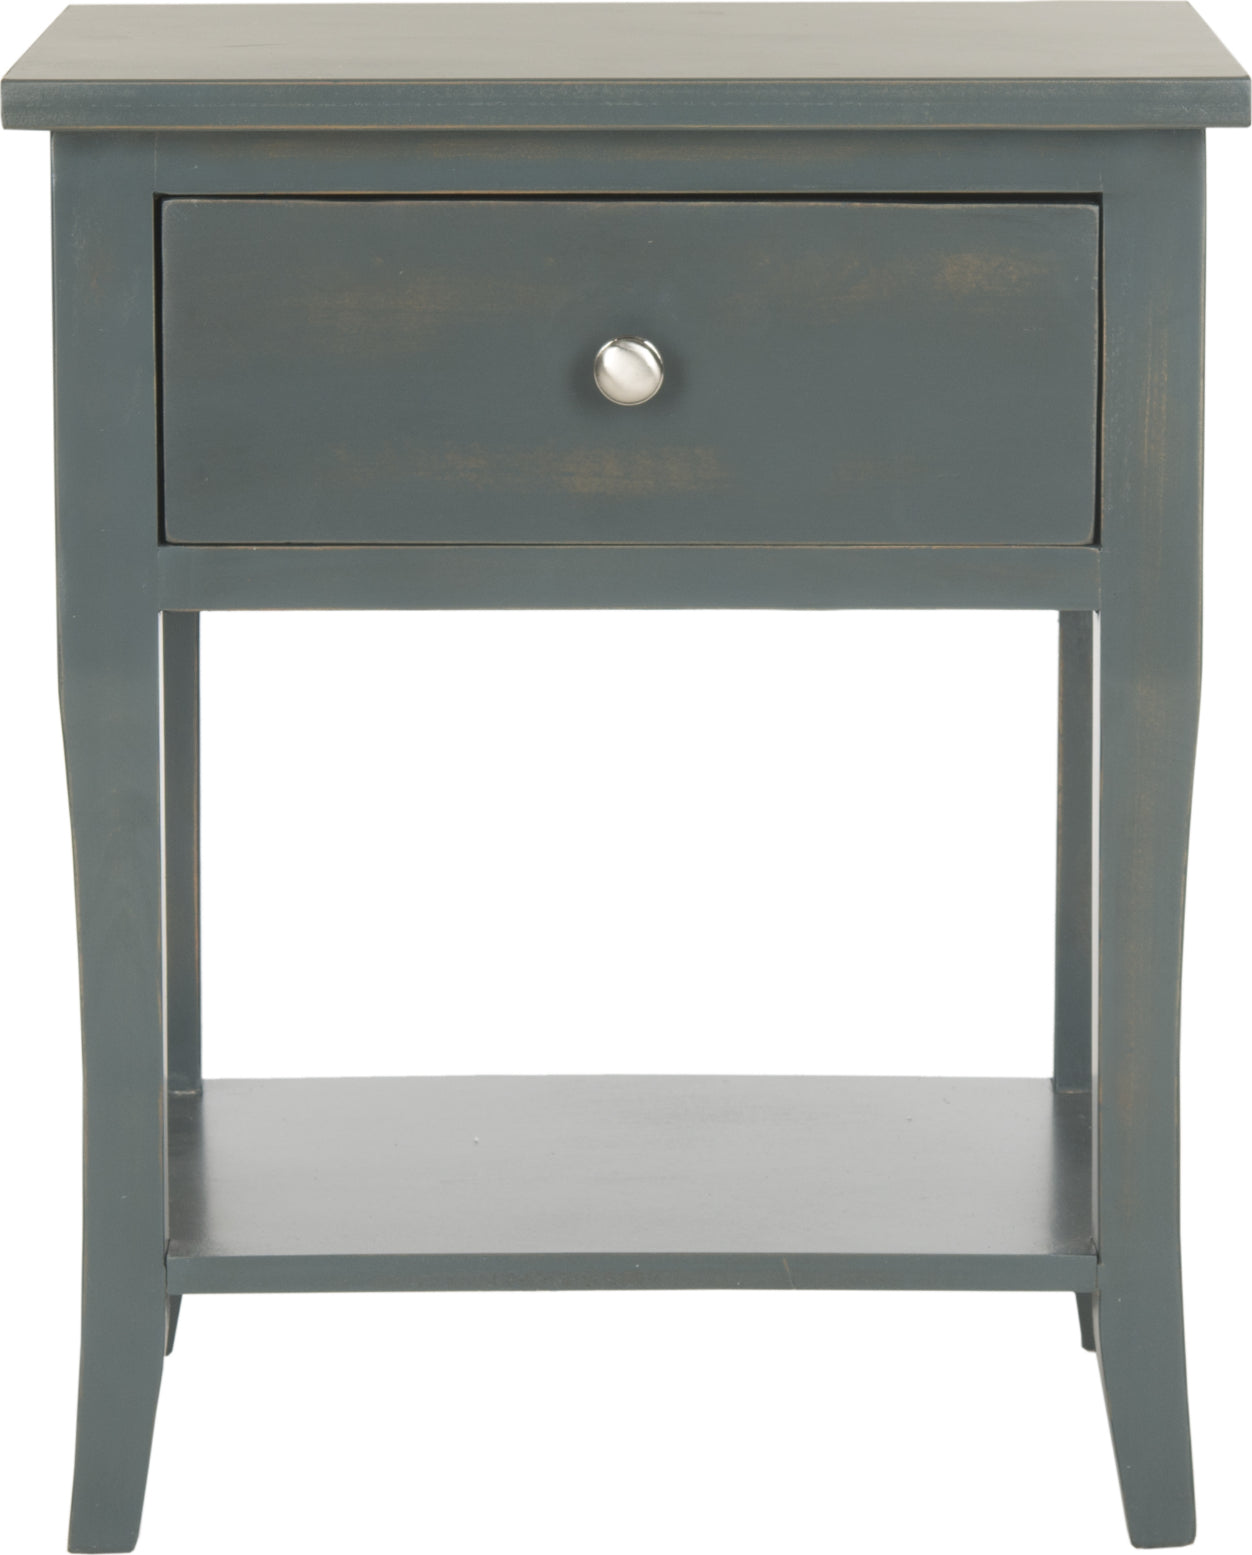 Safavieh Coby End Table With Storage Drawer Steel Teal Furniture main image